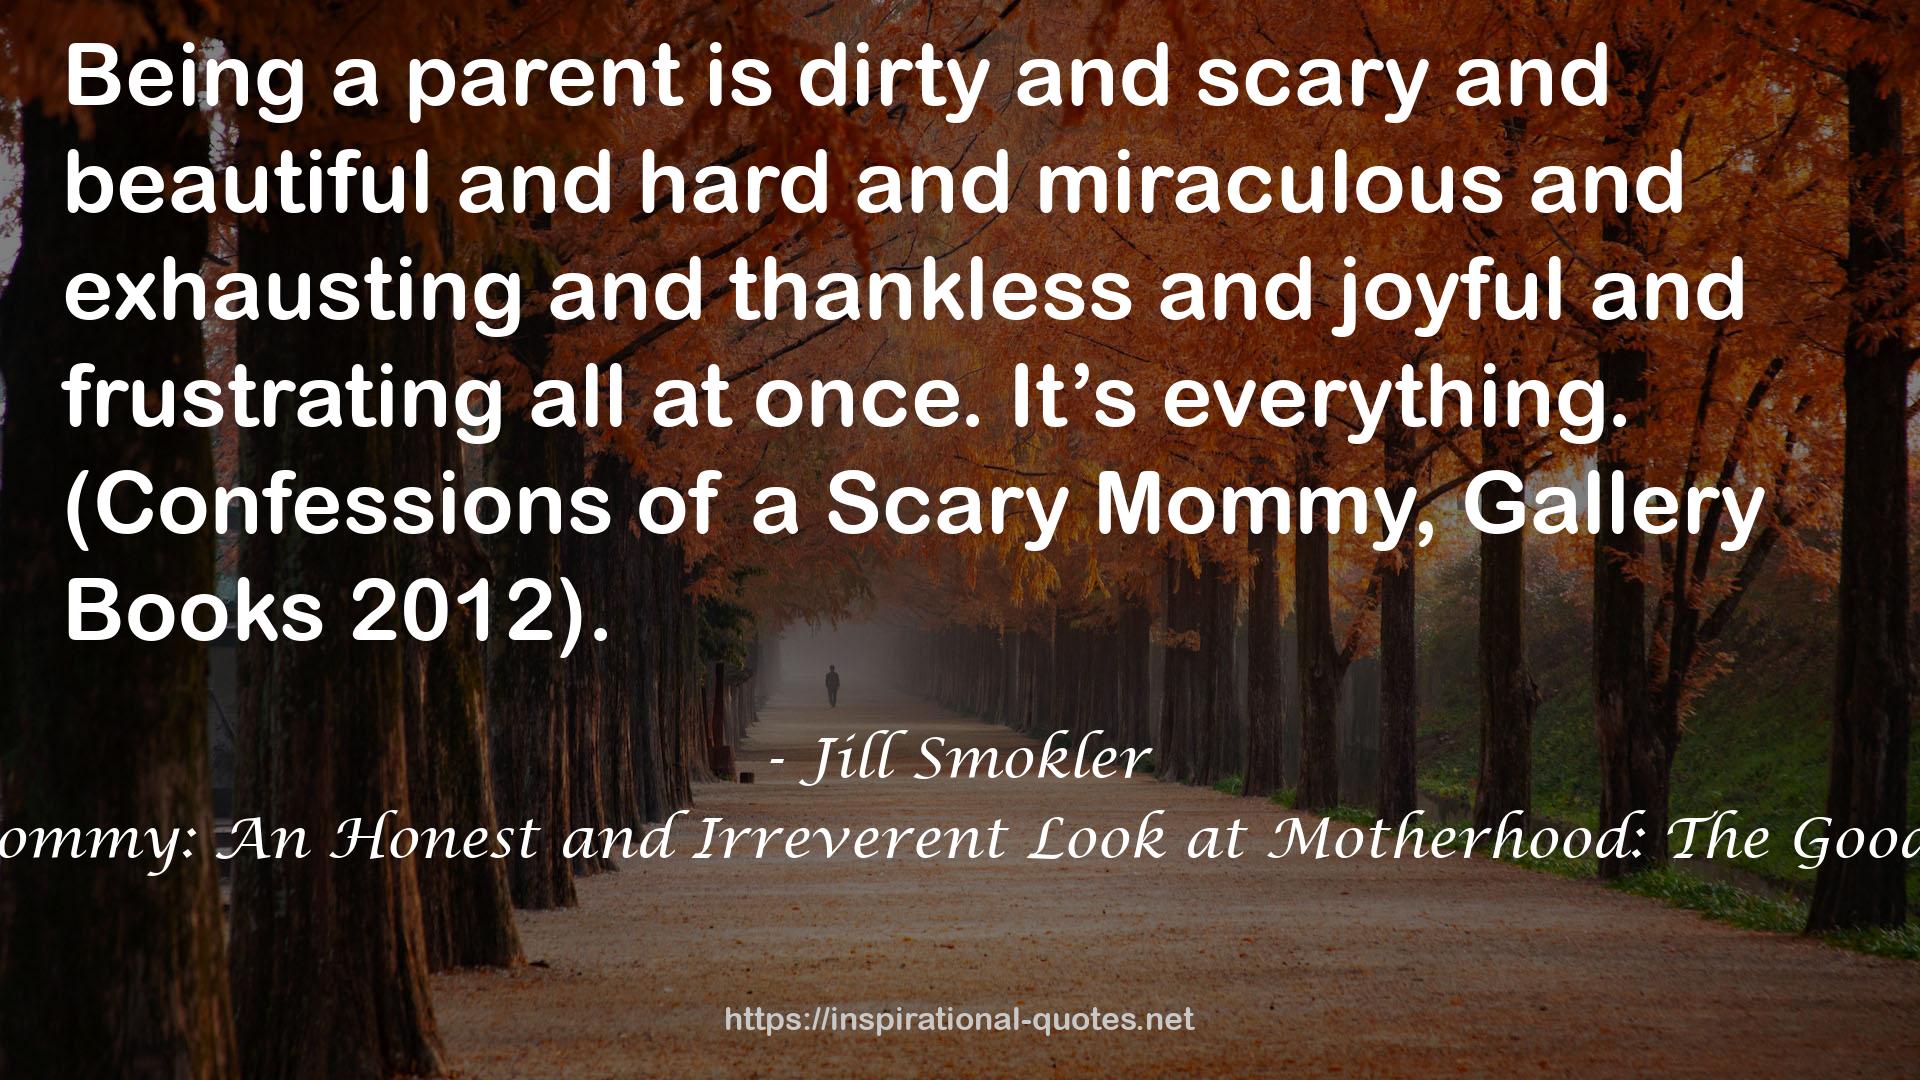 Confessions of a Scary Mommy: An Honest and Irreverent Look at Motherhood: The Good, The Bad, and the Scary QUOTES